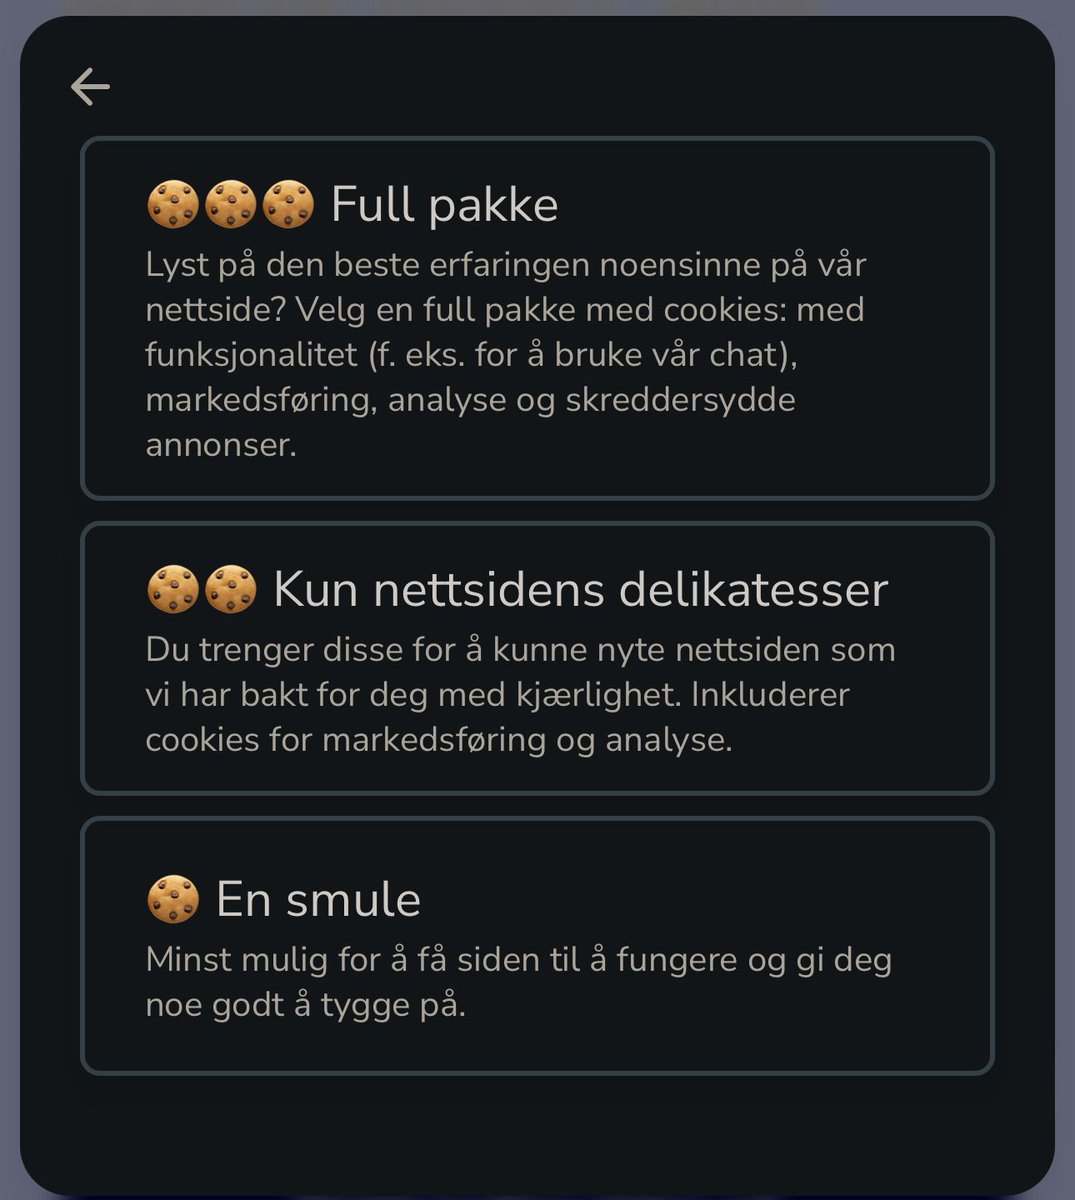 Loving this cookie popup from freska.no. Norwegian, but says: 'All the cookies' 'Only the top delicacies' 'The crumbs only' We know 'We care about your privacy' isn't true, so why not make it fun? (Yes, the small text explains what each option means)